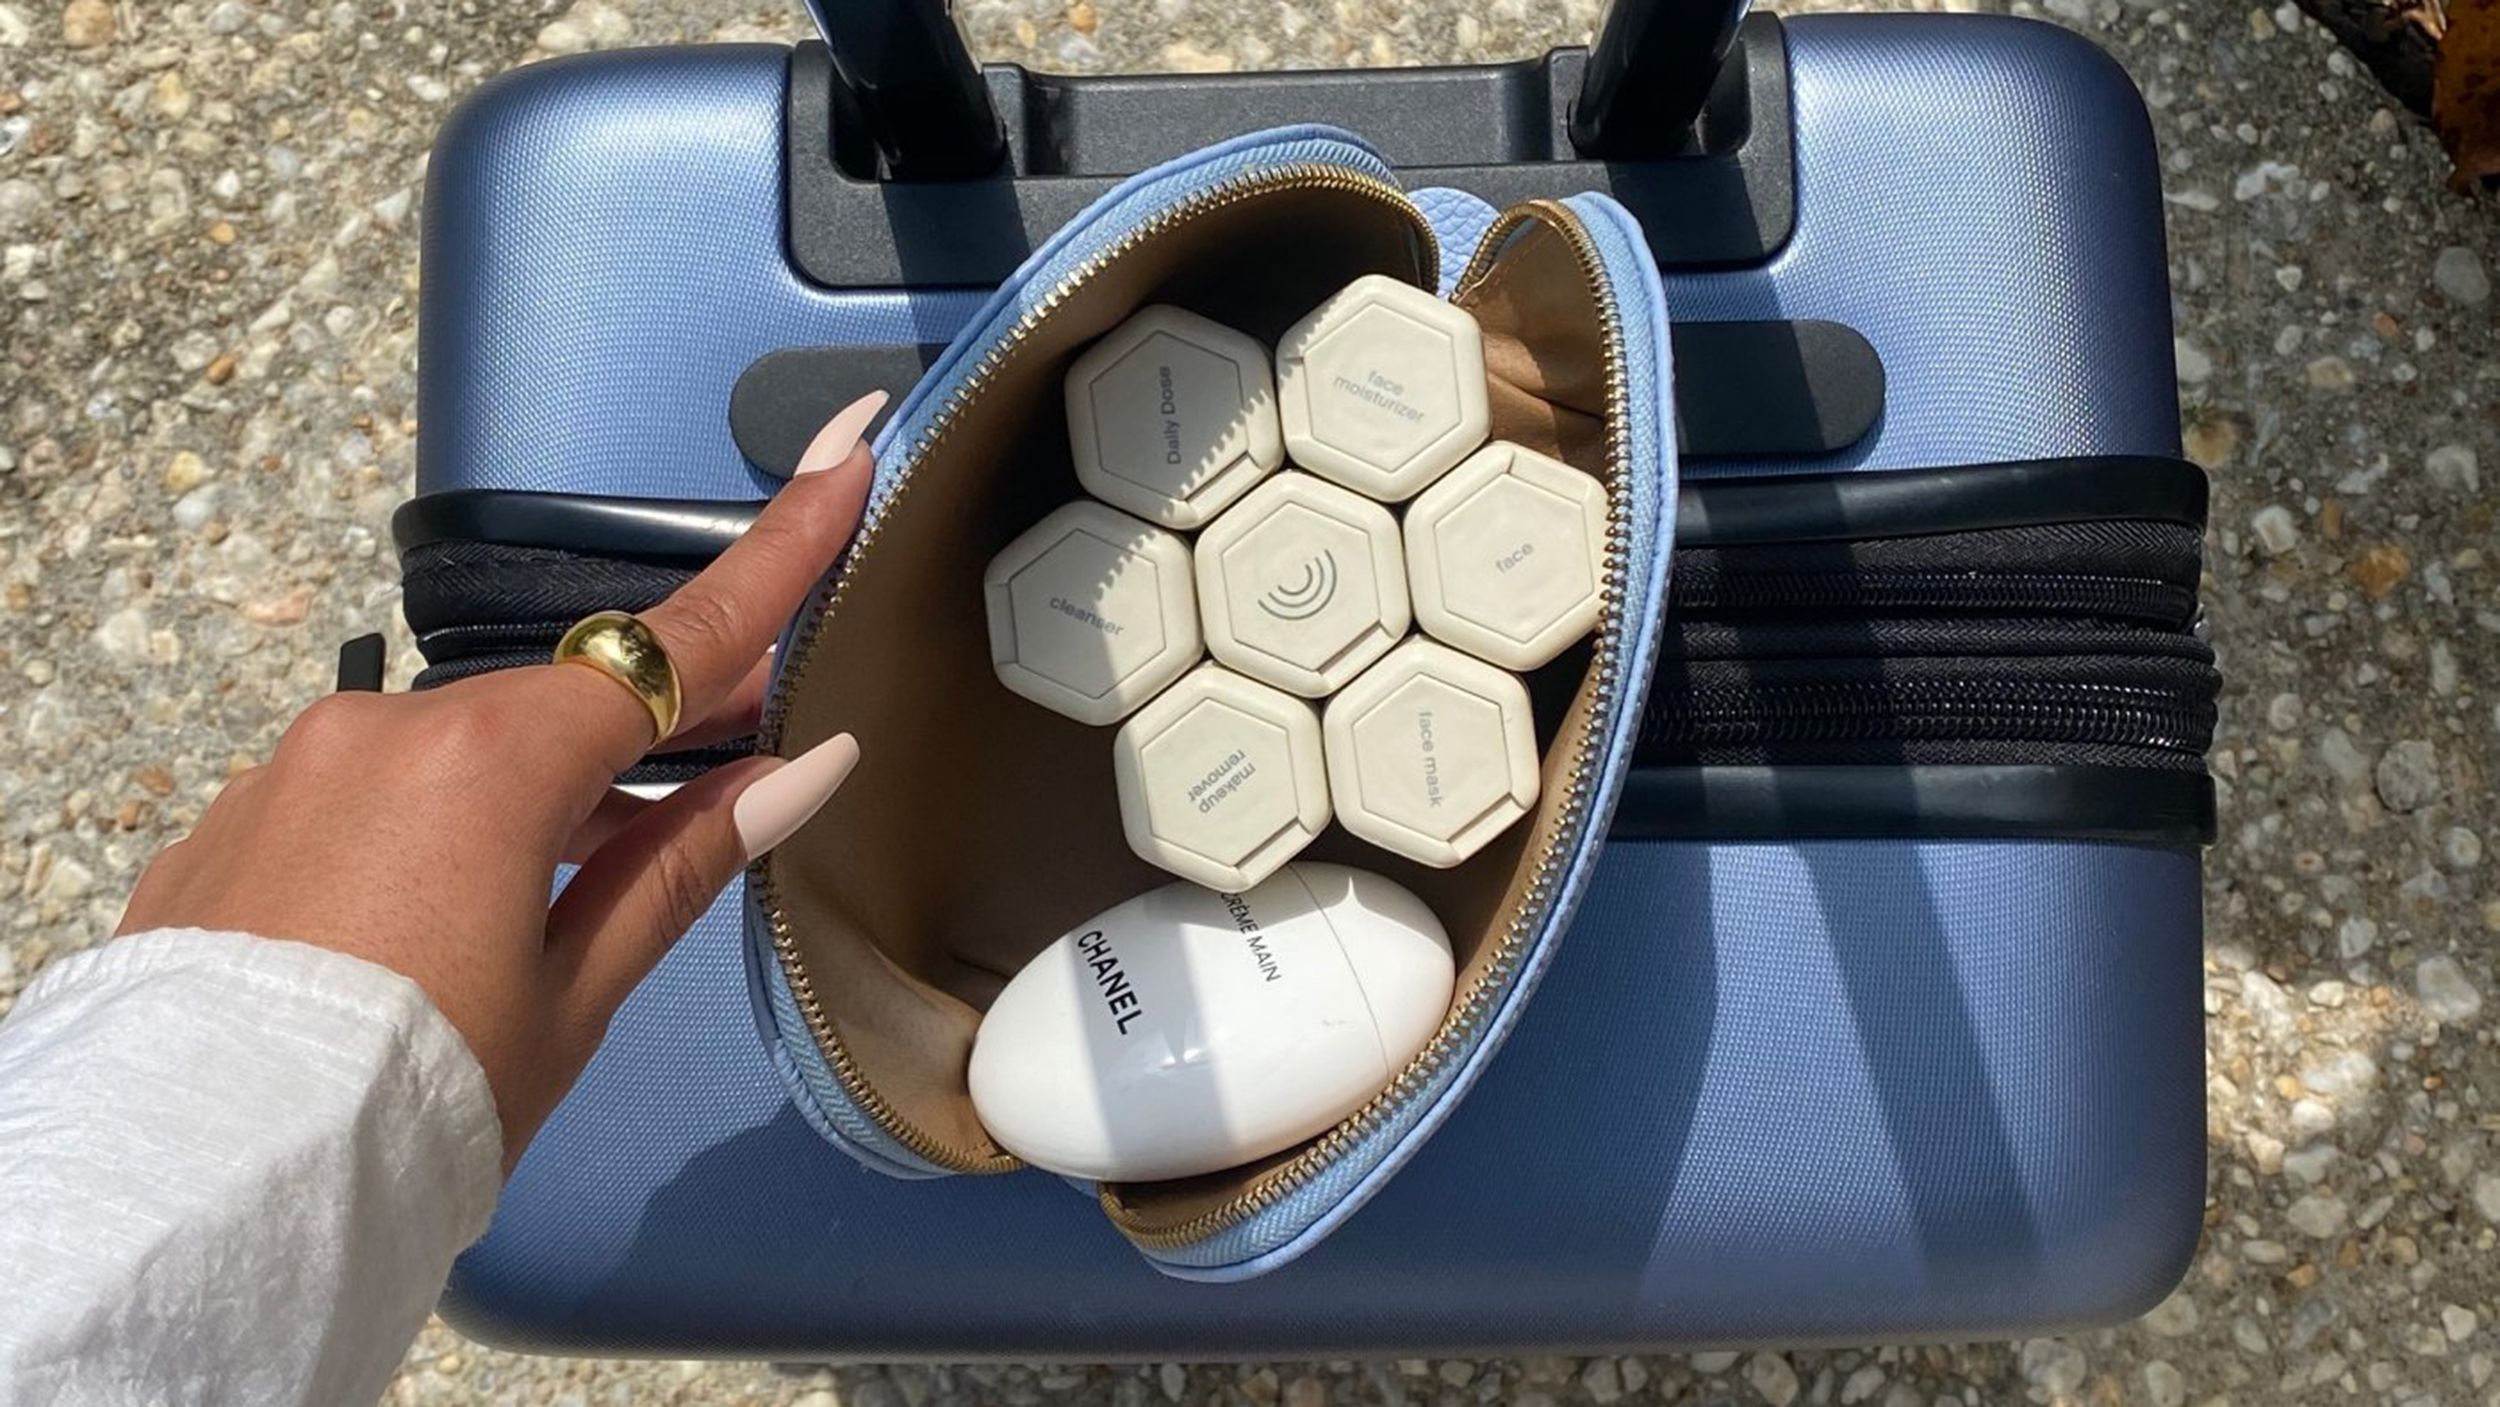 20 products to organize your luggage under $25